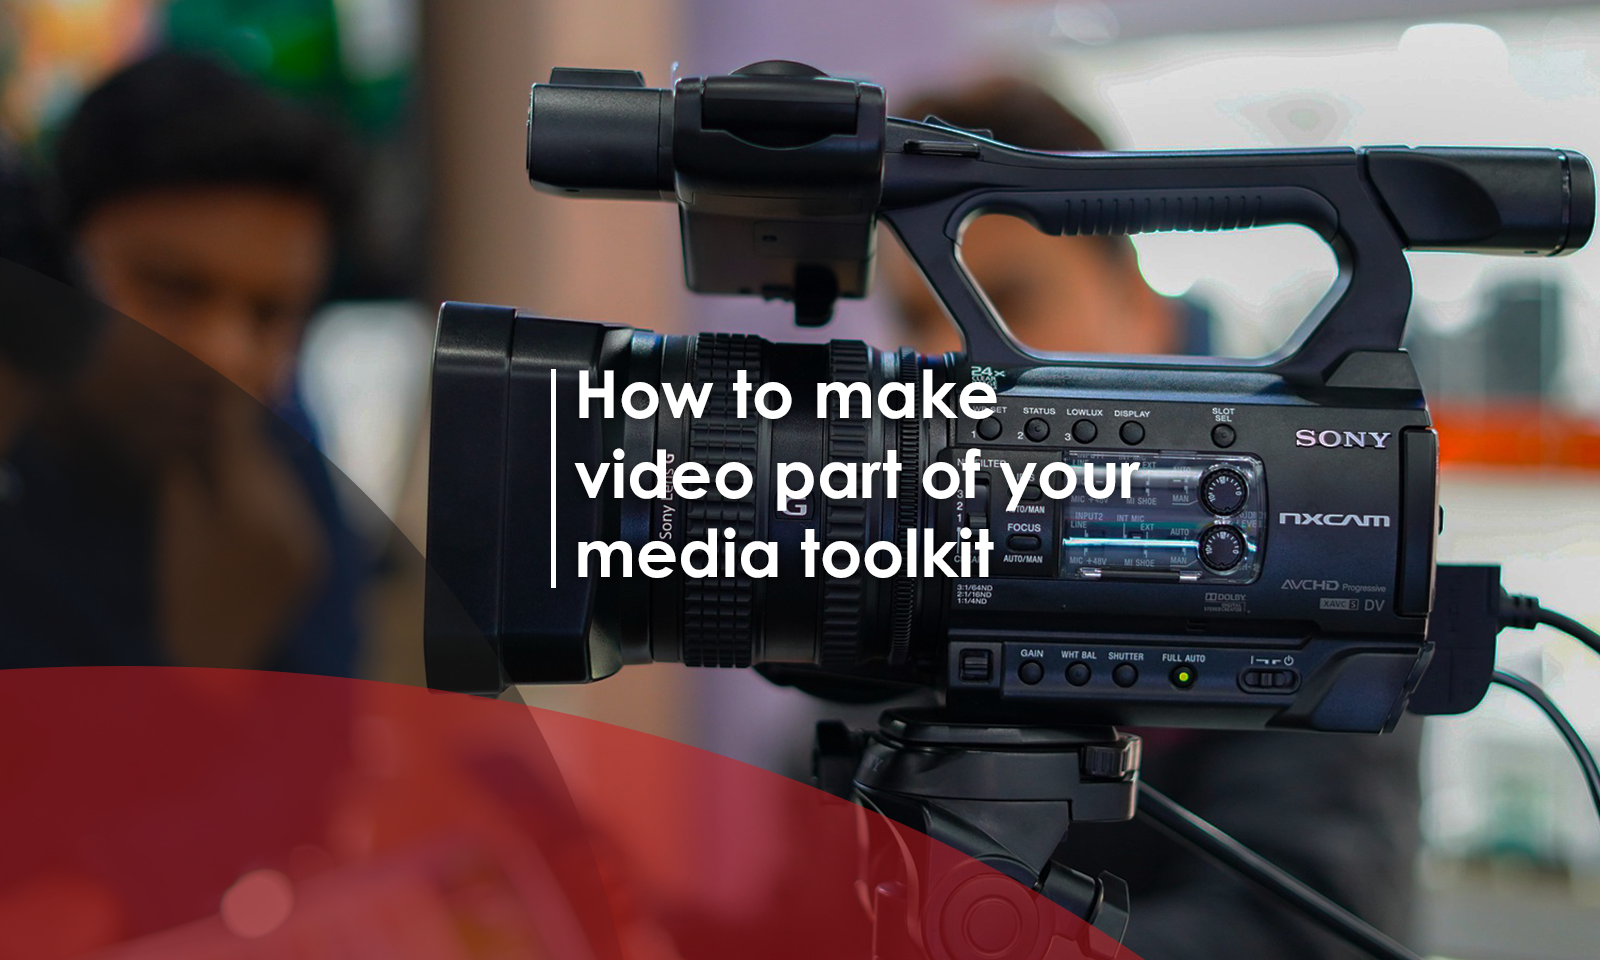 5 ways to make video part of your media toolkit